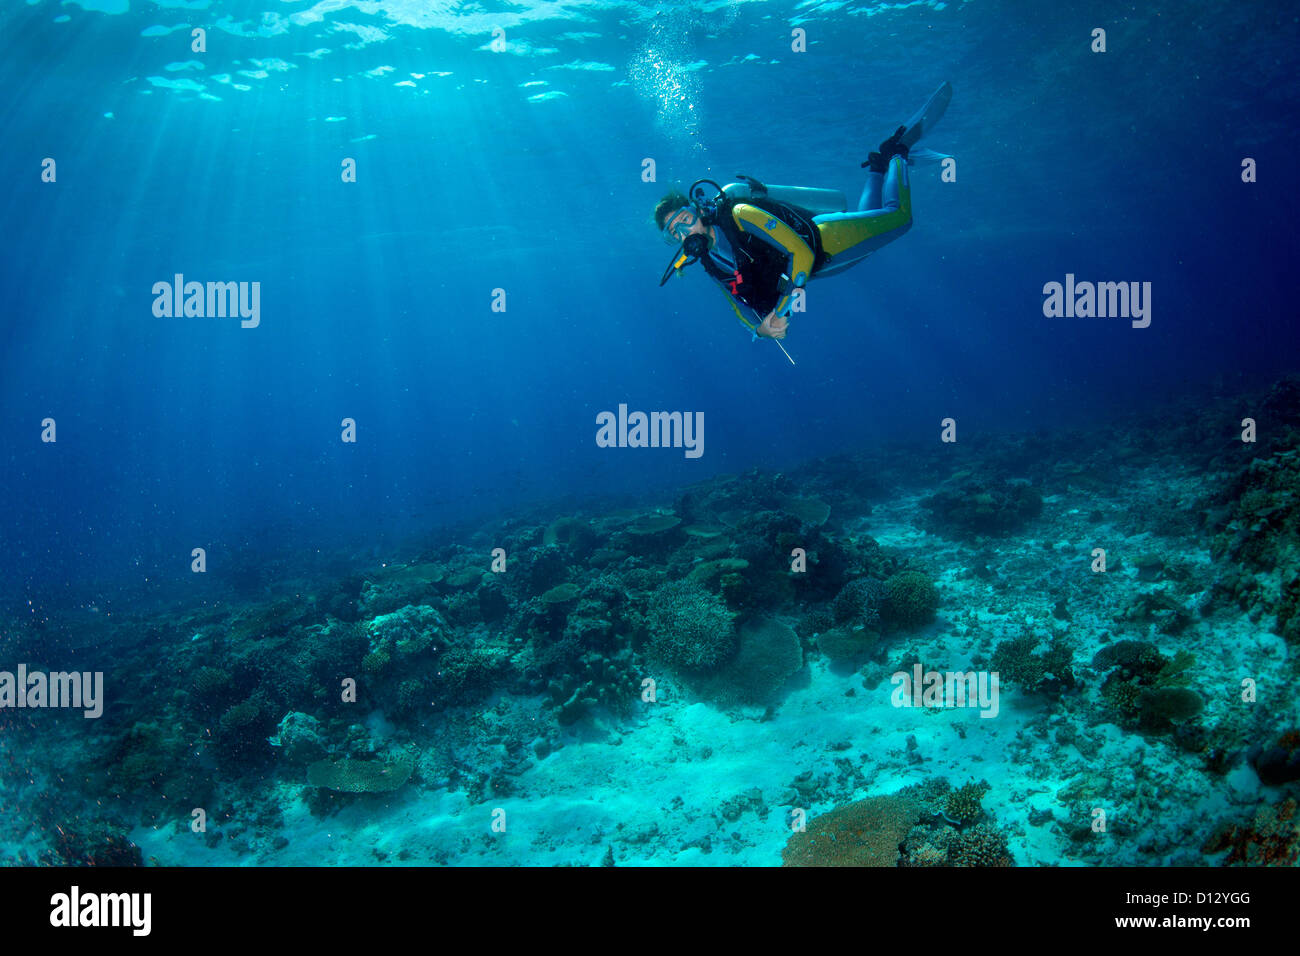 Diving in the coral reef, Mimaropa, Mulaong, South China Sea, Philippines, Asia Stock Photo